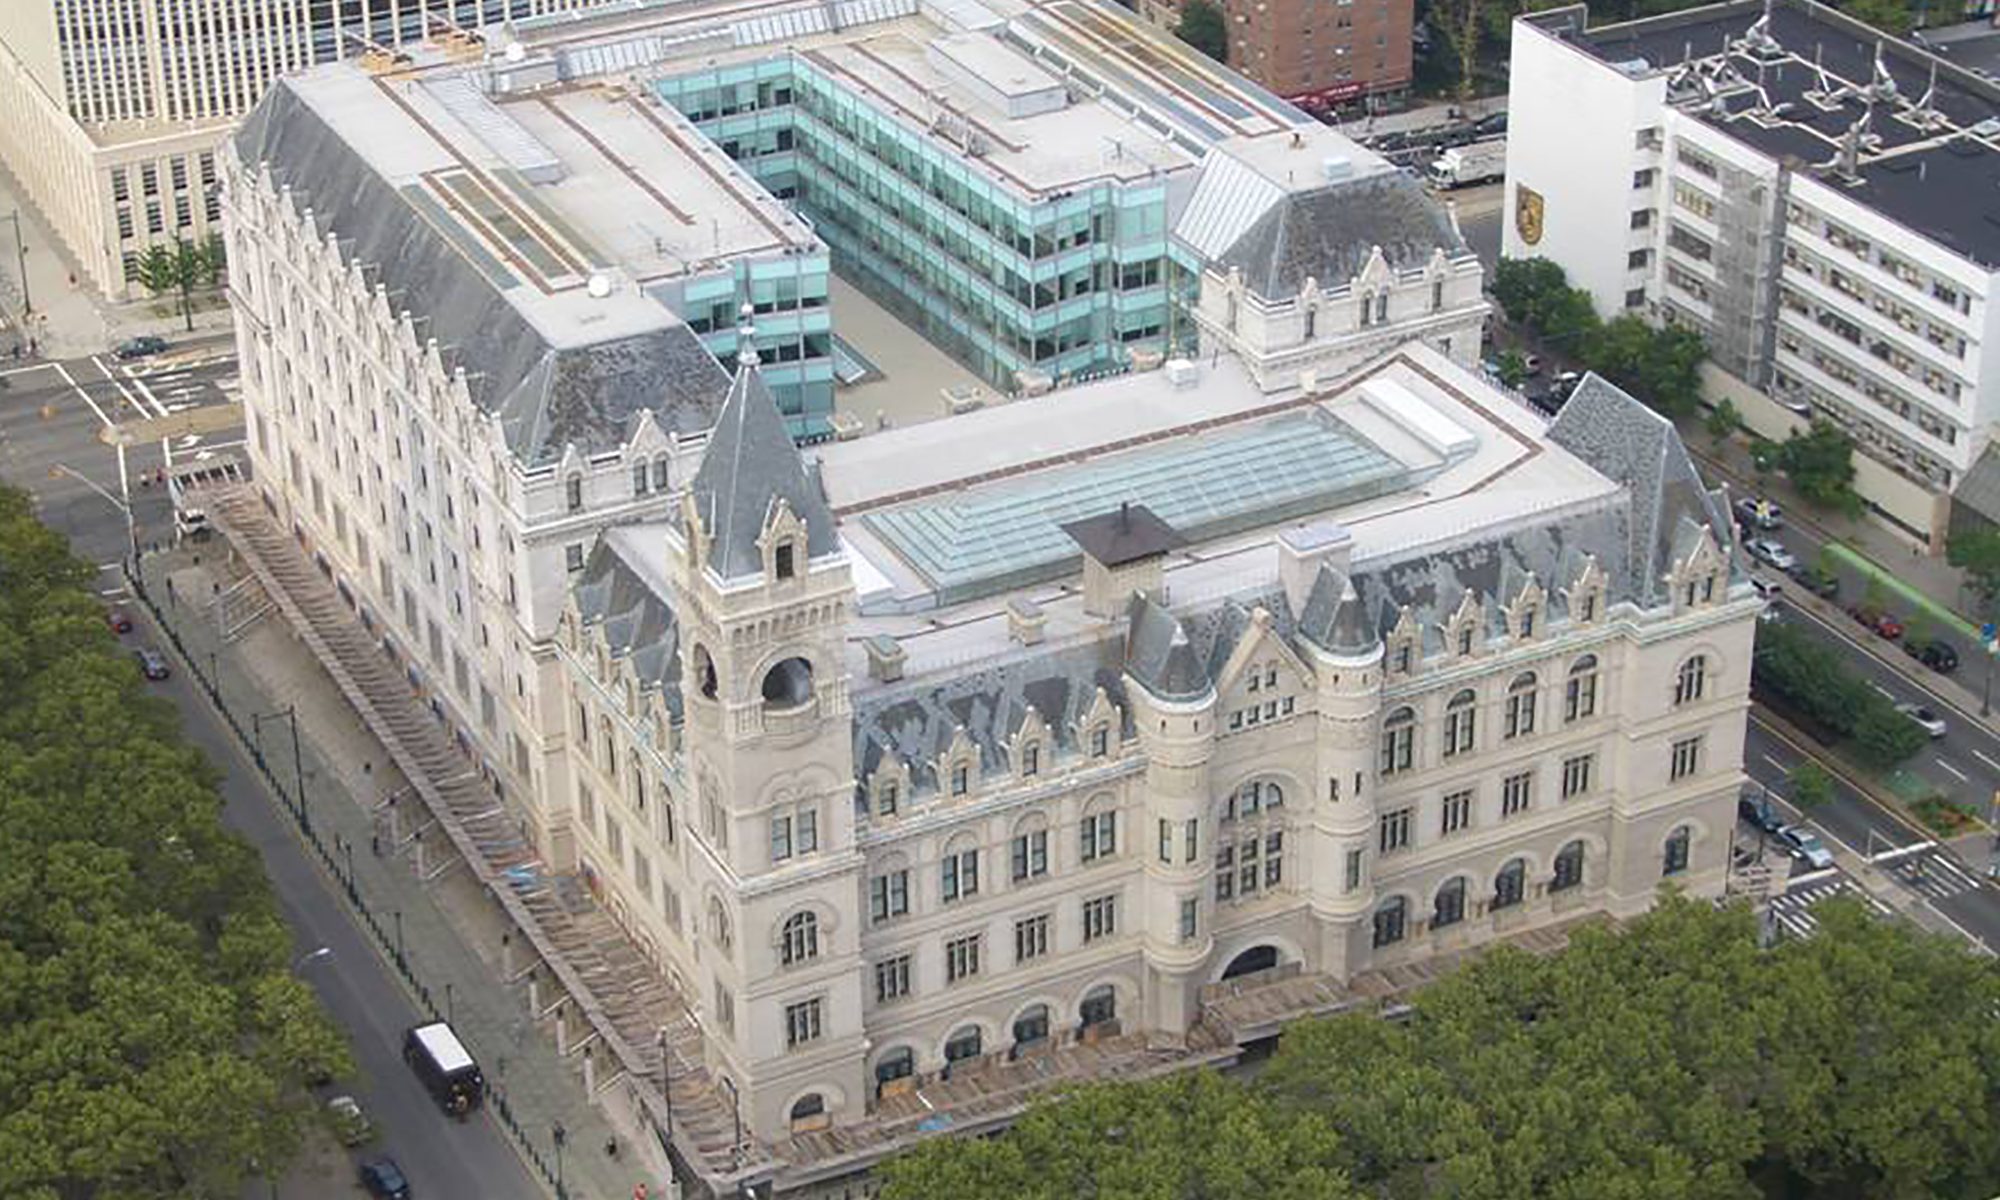 Aerial view of Conrad B. Duberstein U.S. Bankruptcy Courthouse